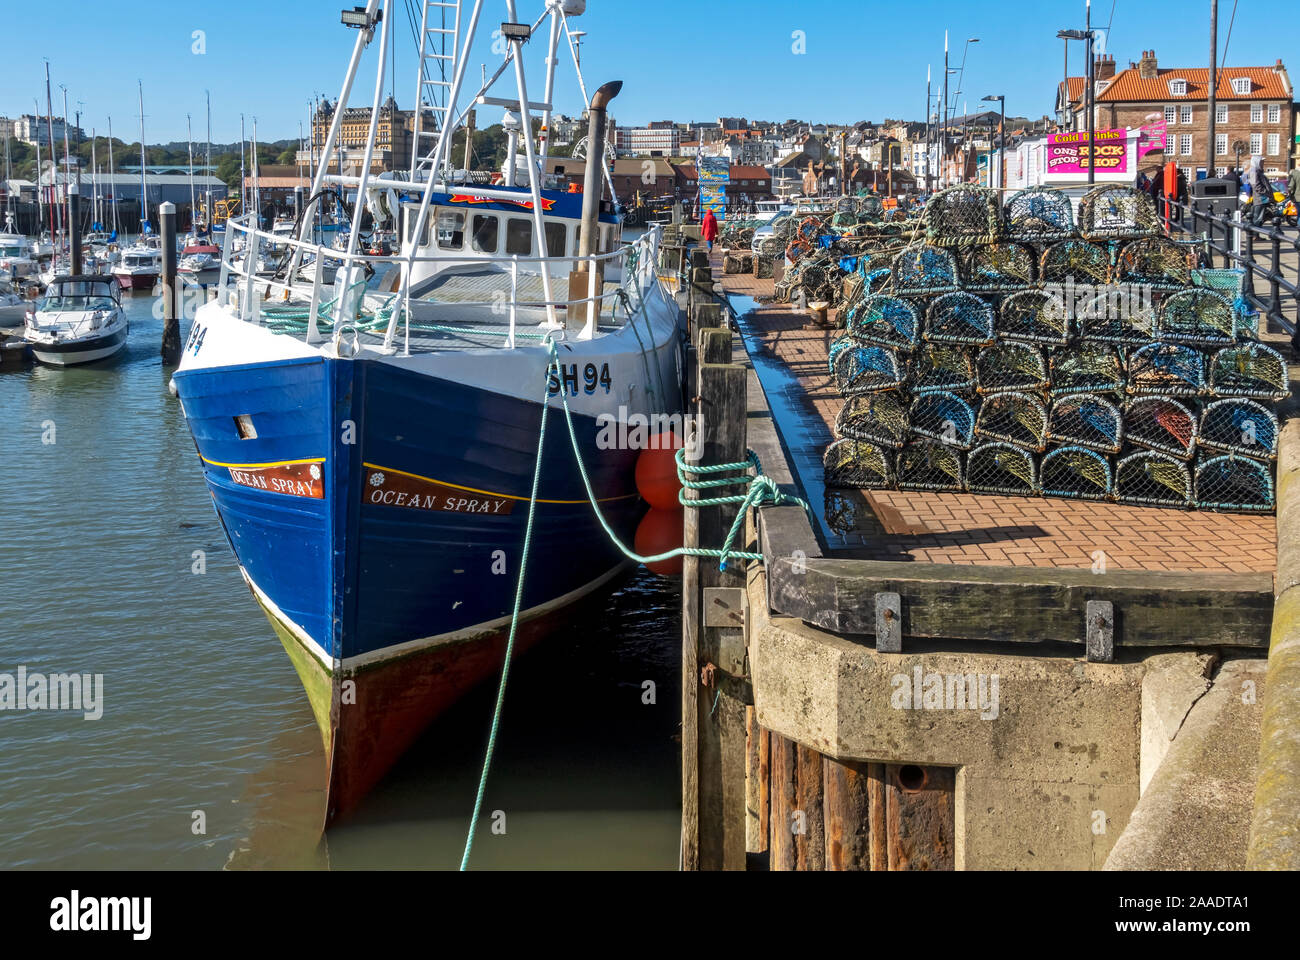 Fishing boat at low tide next to stacks of lobster and crab pots on the quayside Scarborough North Yorkshire England UK United Kingdom GB Britain Stock Photo